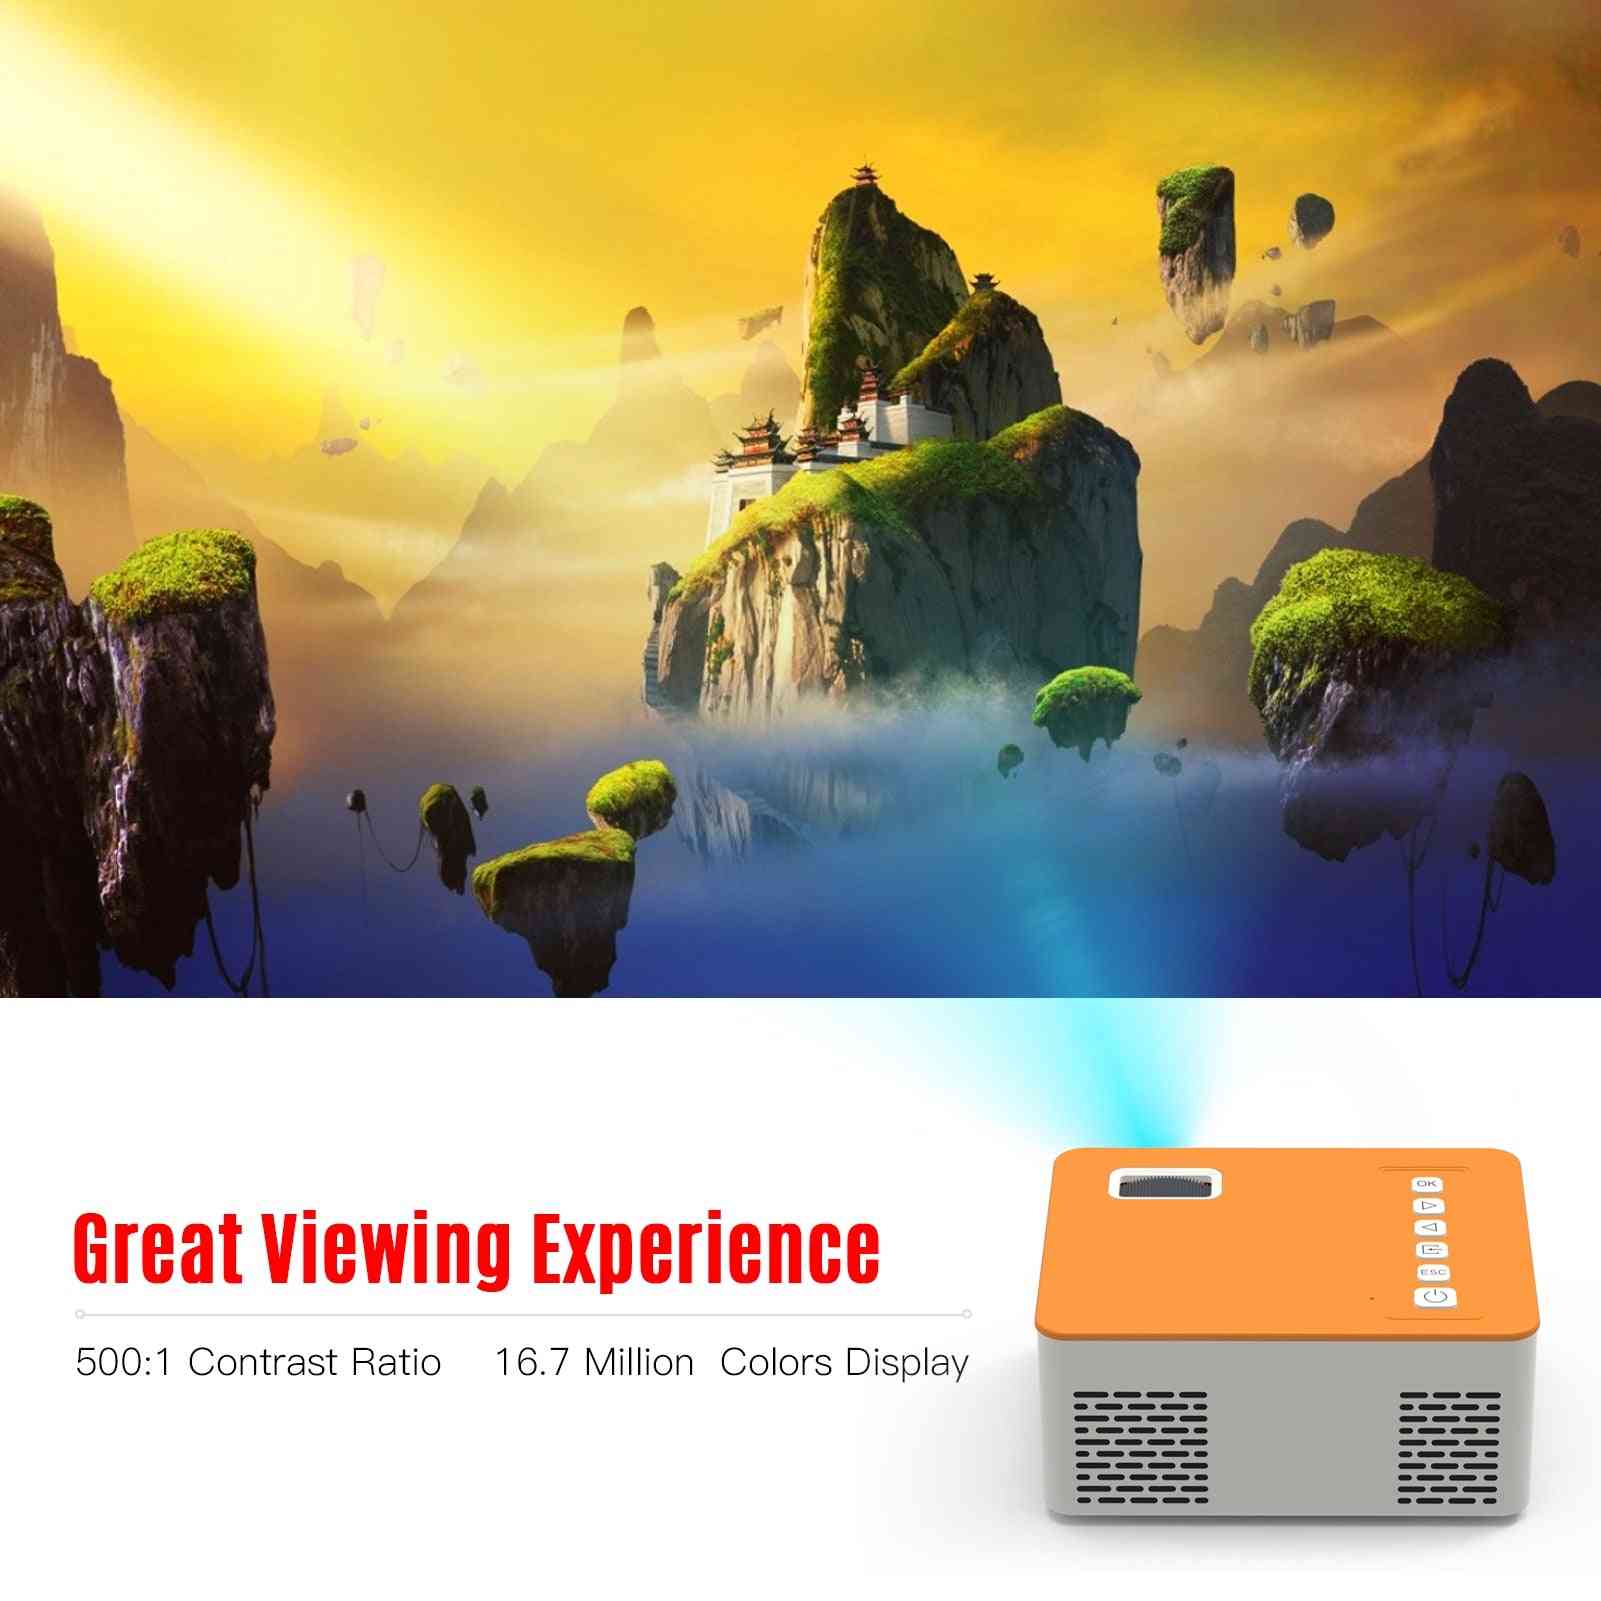 Mini Portable Video Projector Led Movie Home Theater 110inch Display